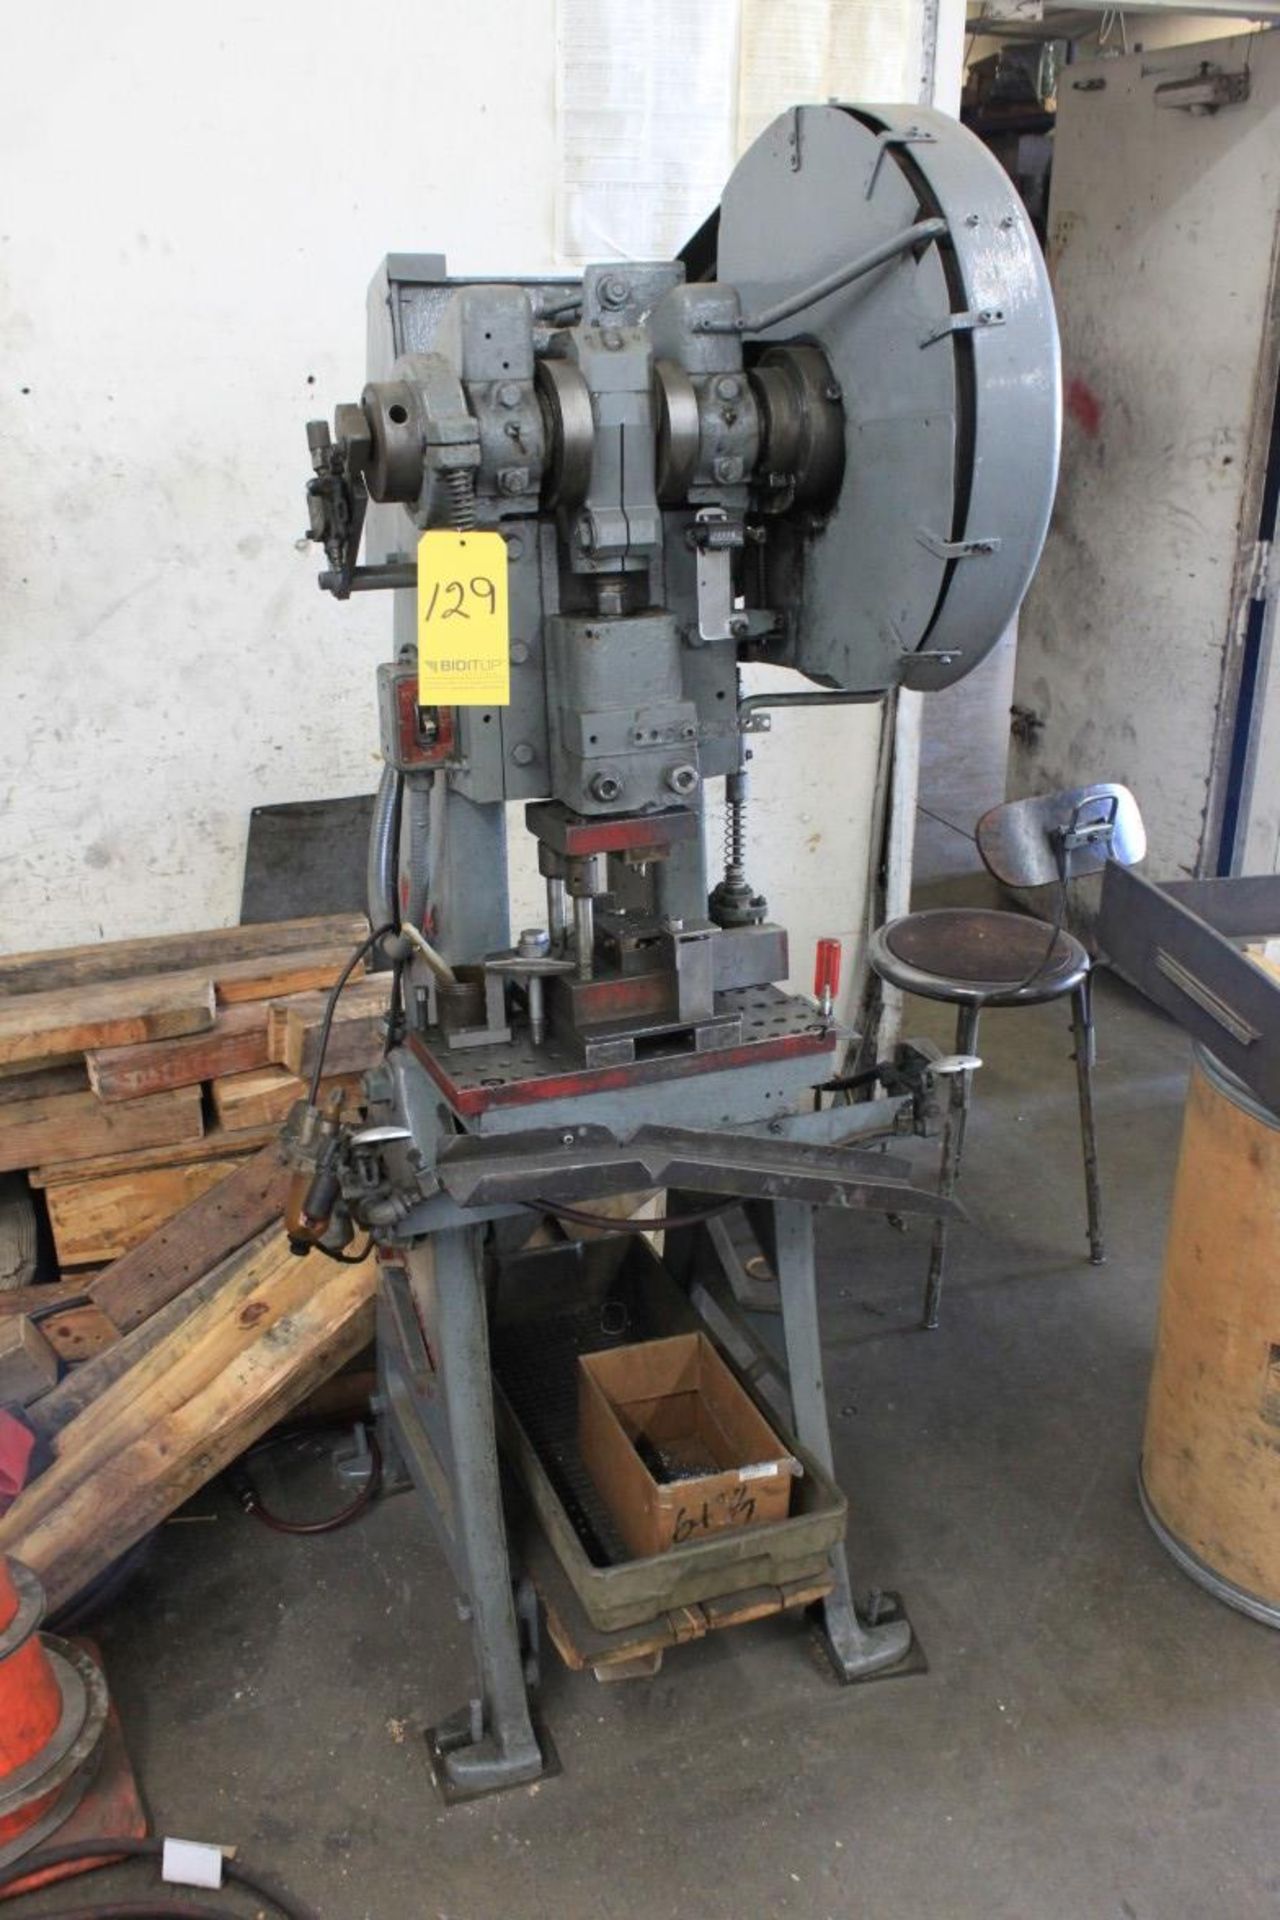 Diamond Mach Tool Co. No. 14 OBI Punch Press, Bed Size: 16'' L to R, 8'' F to B, 1 HP Motor (Located